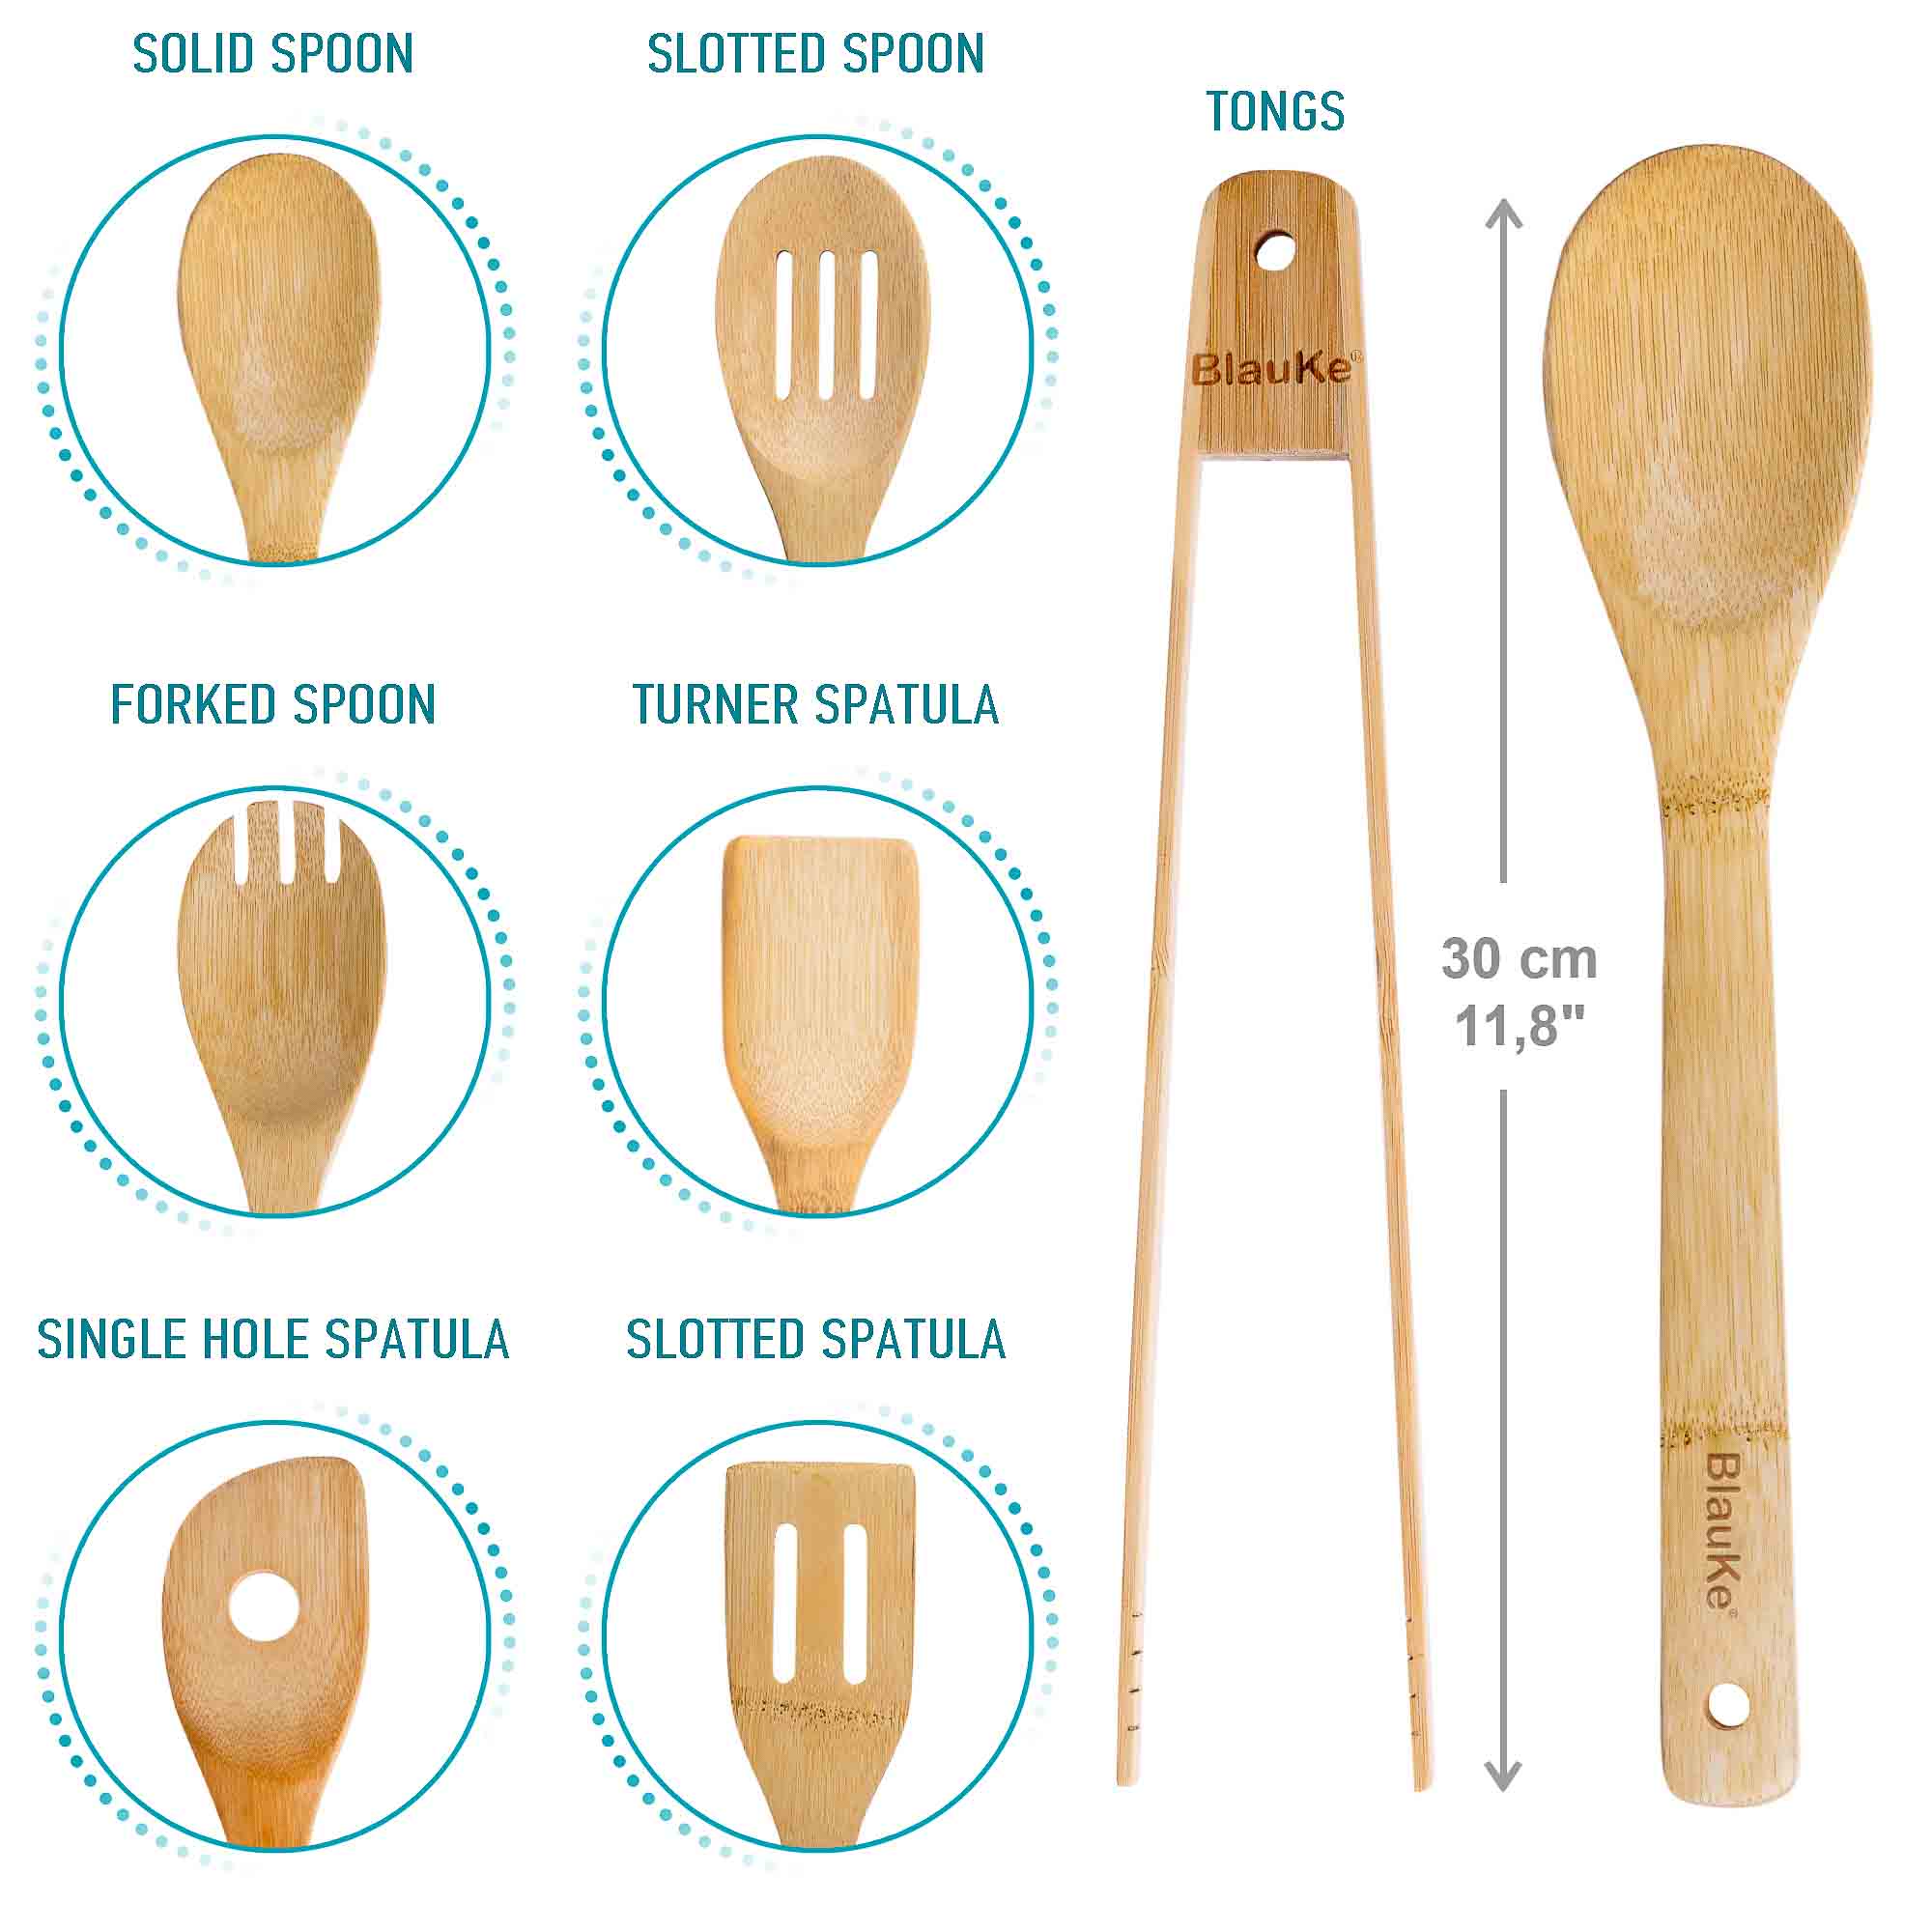 Wooden Spoons for Cooking 7-Pack - Bamboo Kitchen Utensils Set for Nonstick Cookware